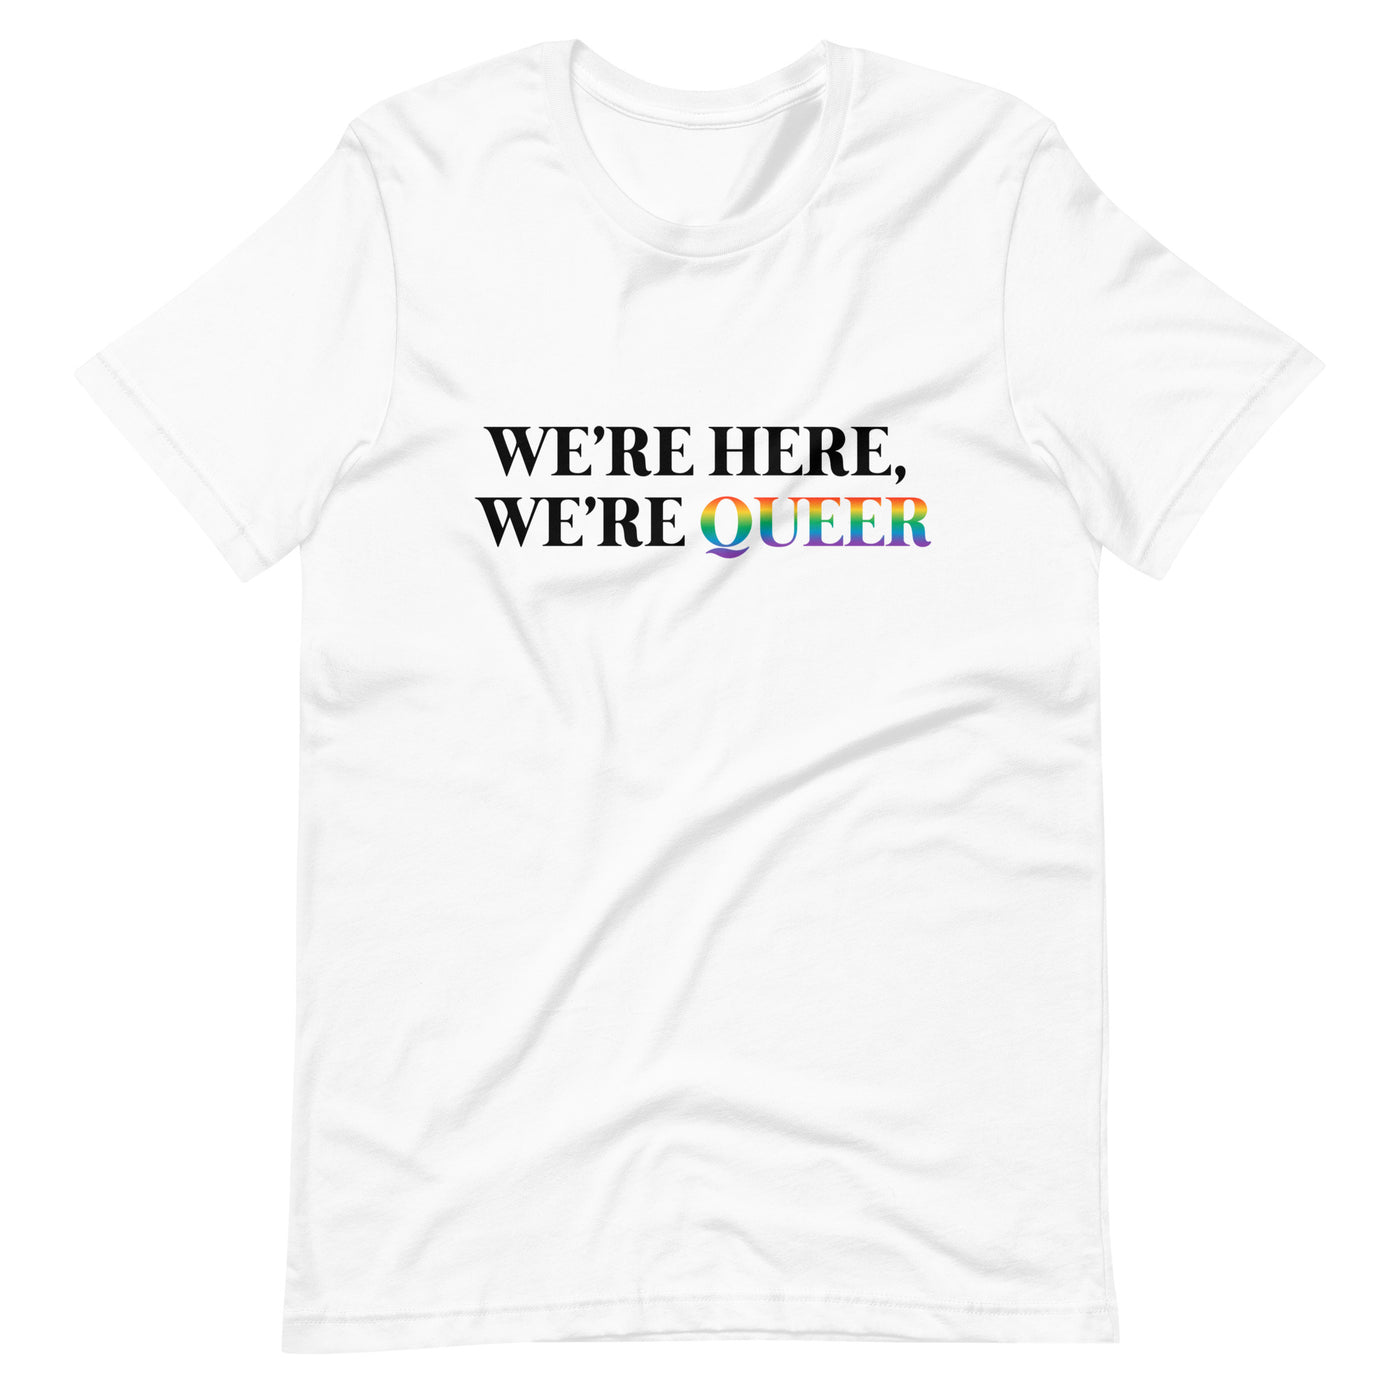 Pride Clothes - Step Out & Step Up We’re Here, We’re Queer Pride T-Shirt - White